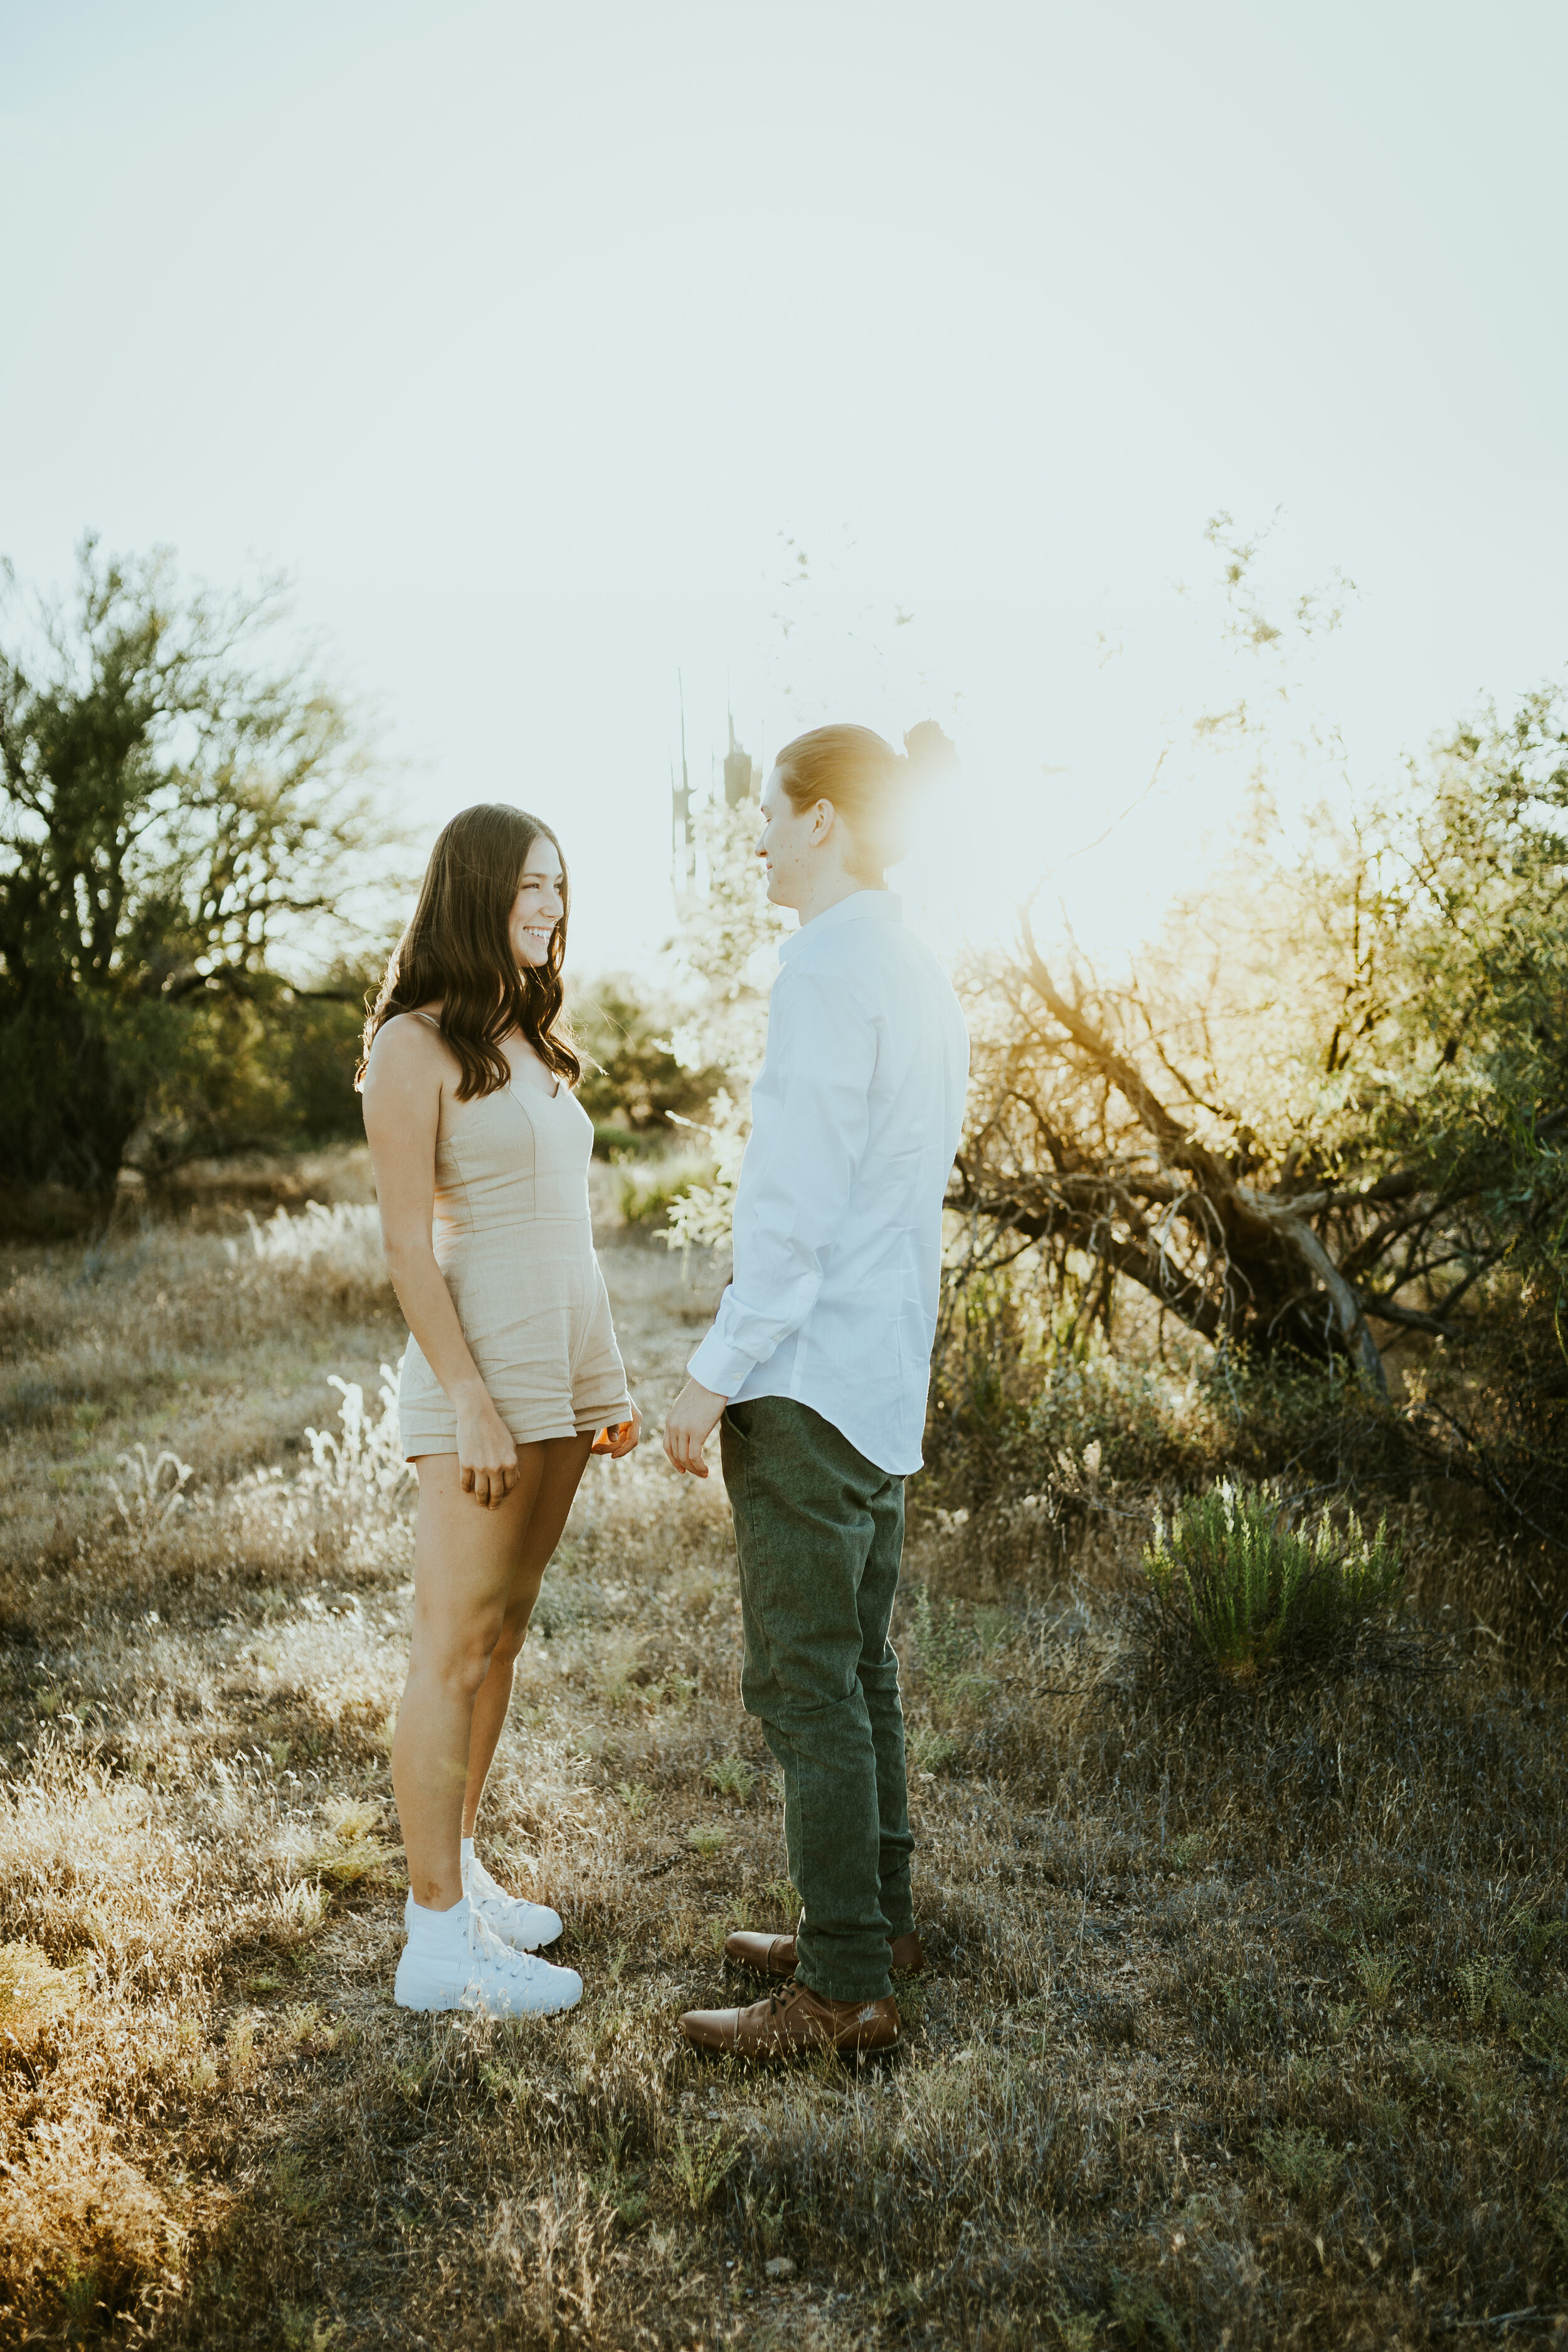 granite mountain trailhead scottsdale arizona engagement outfit inspiration couples outfit ideas for an engagement session-1-2.jpg